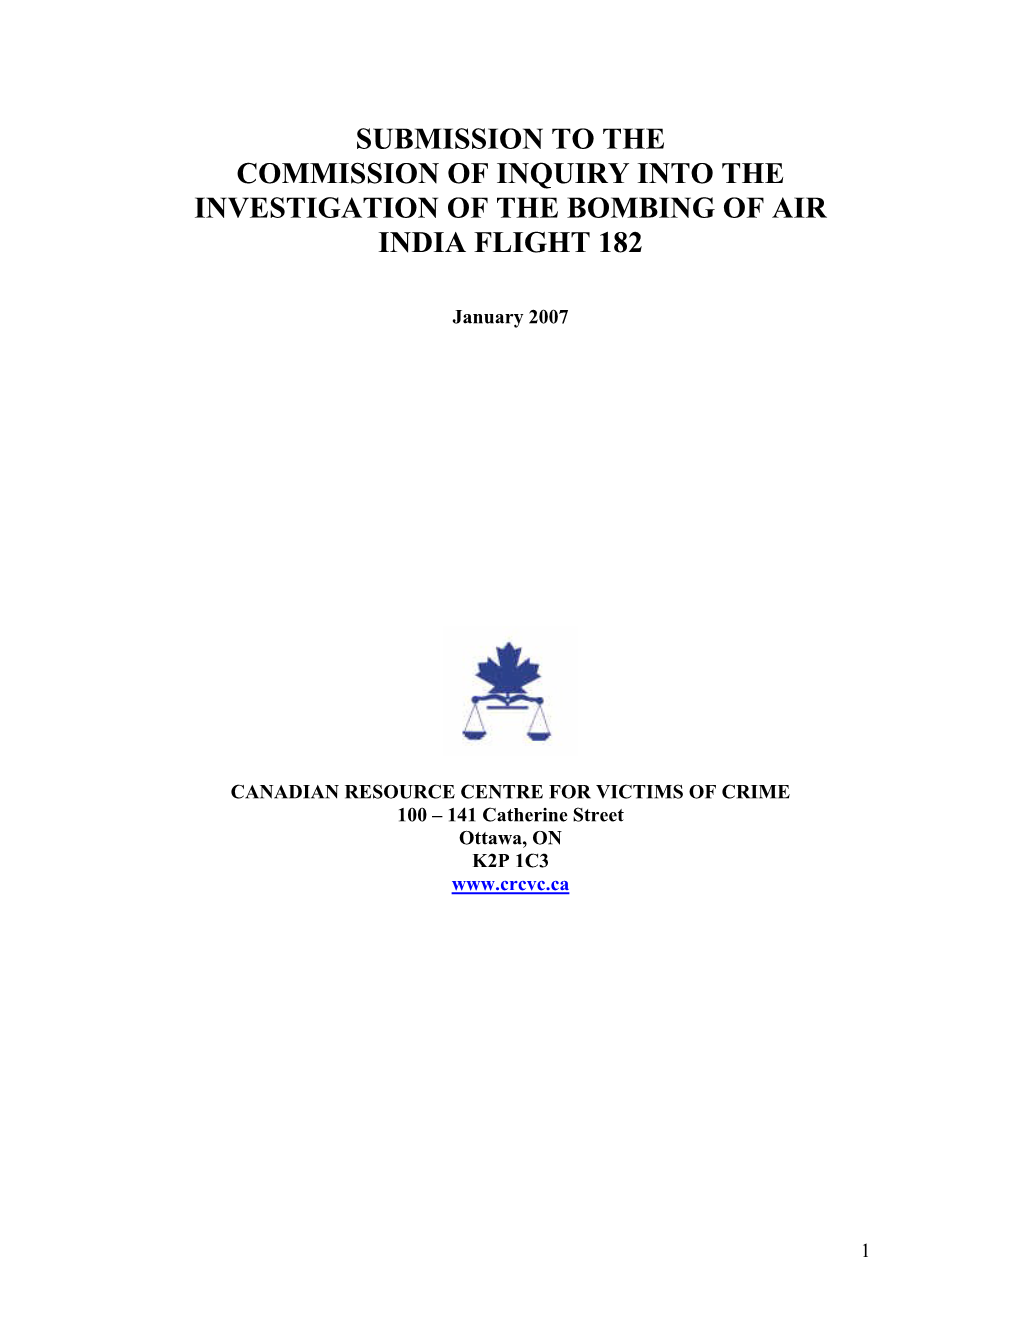 Submission to the Commission of Inquiry Into the Investigation of the Bombing of Air India Flight 182